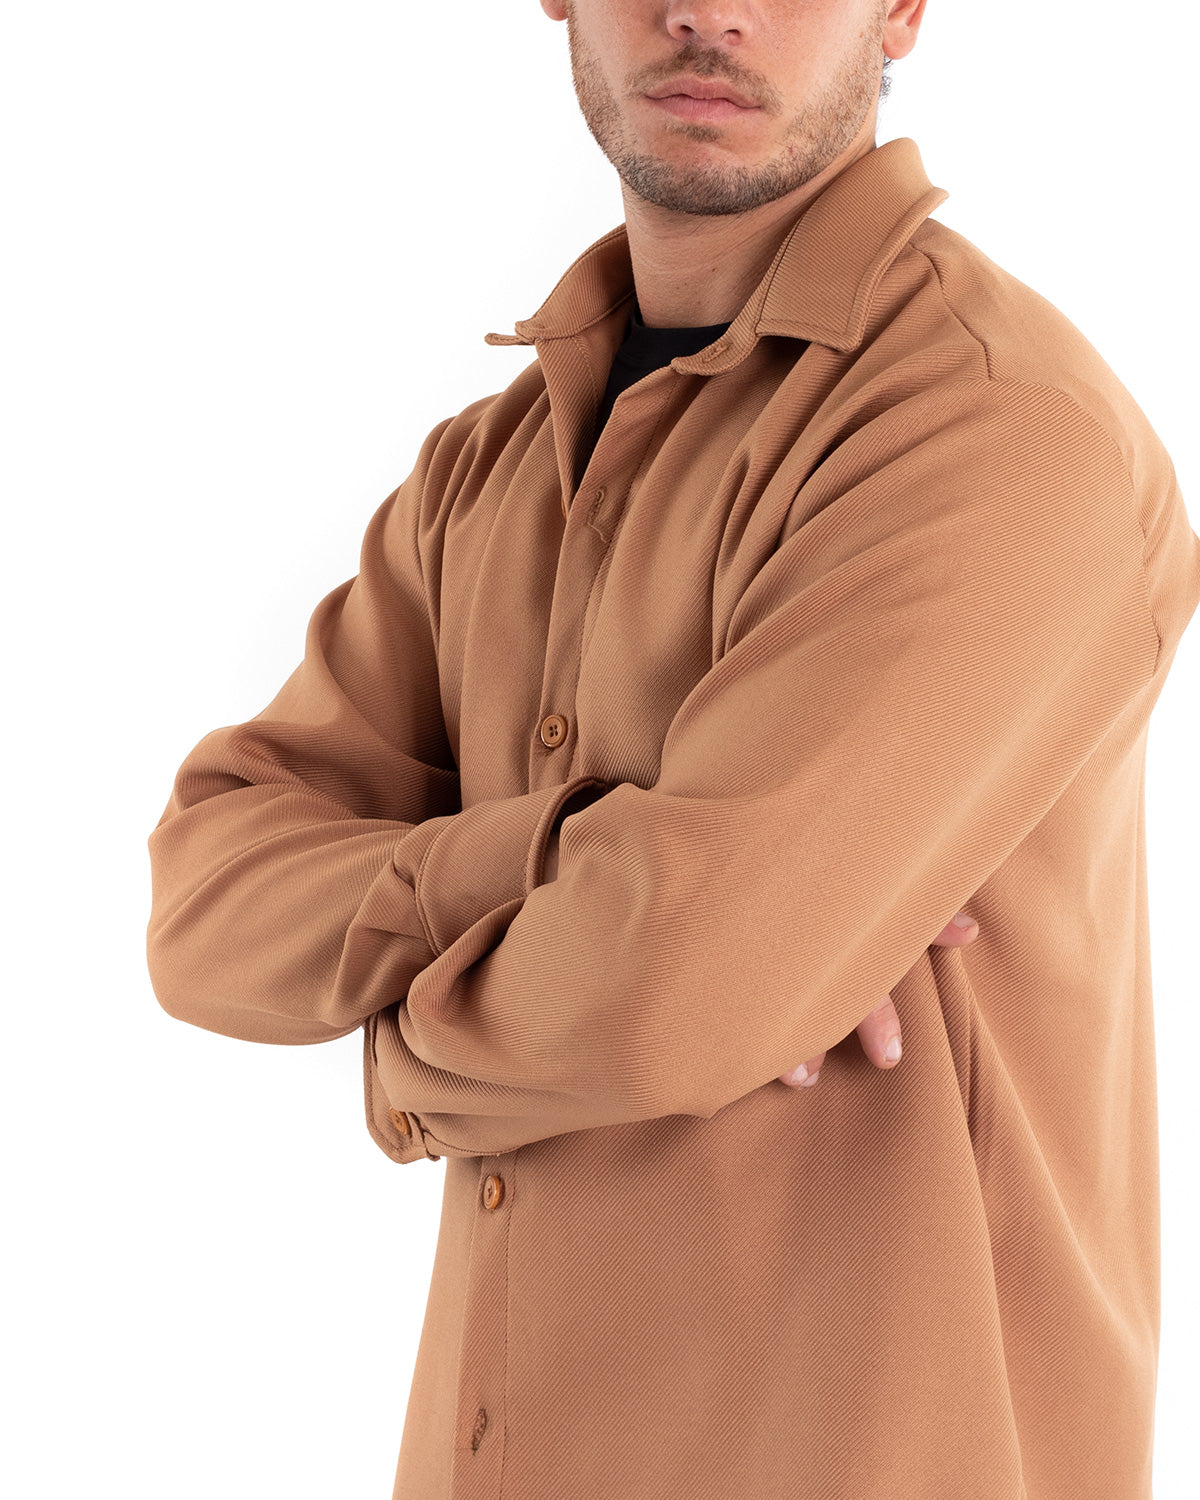 Men's Shirt With Collar Long Sleeve Solid Color Cotton Camel GIOSAL-C2465A